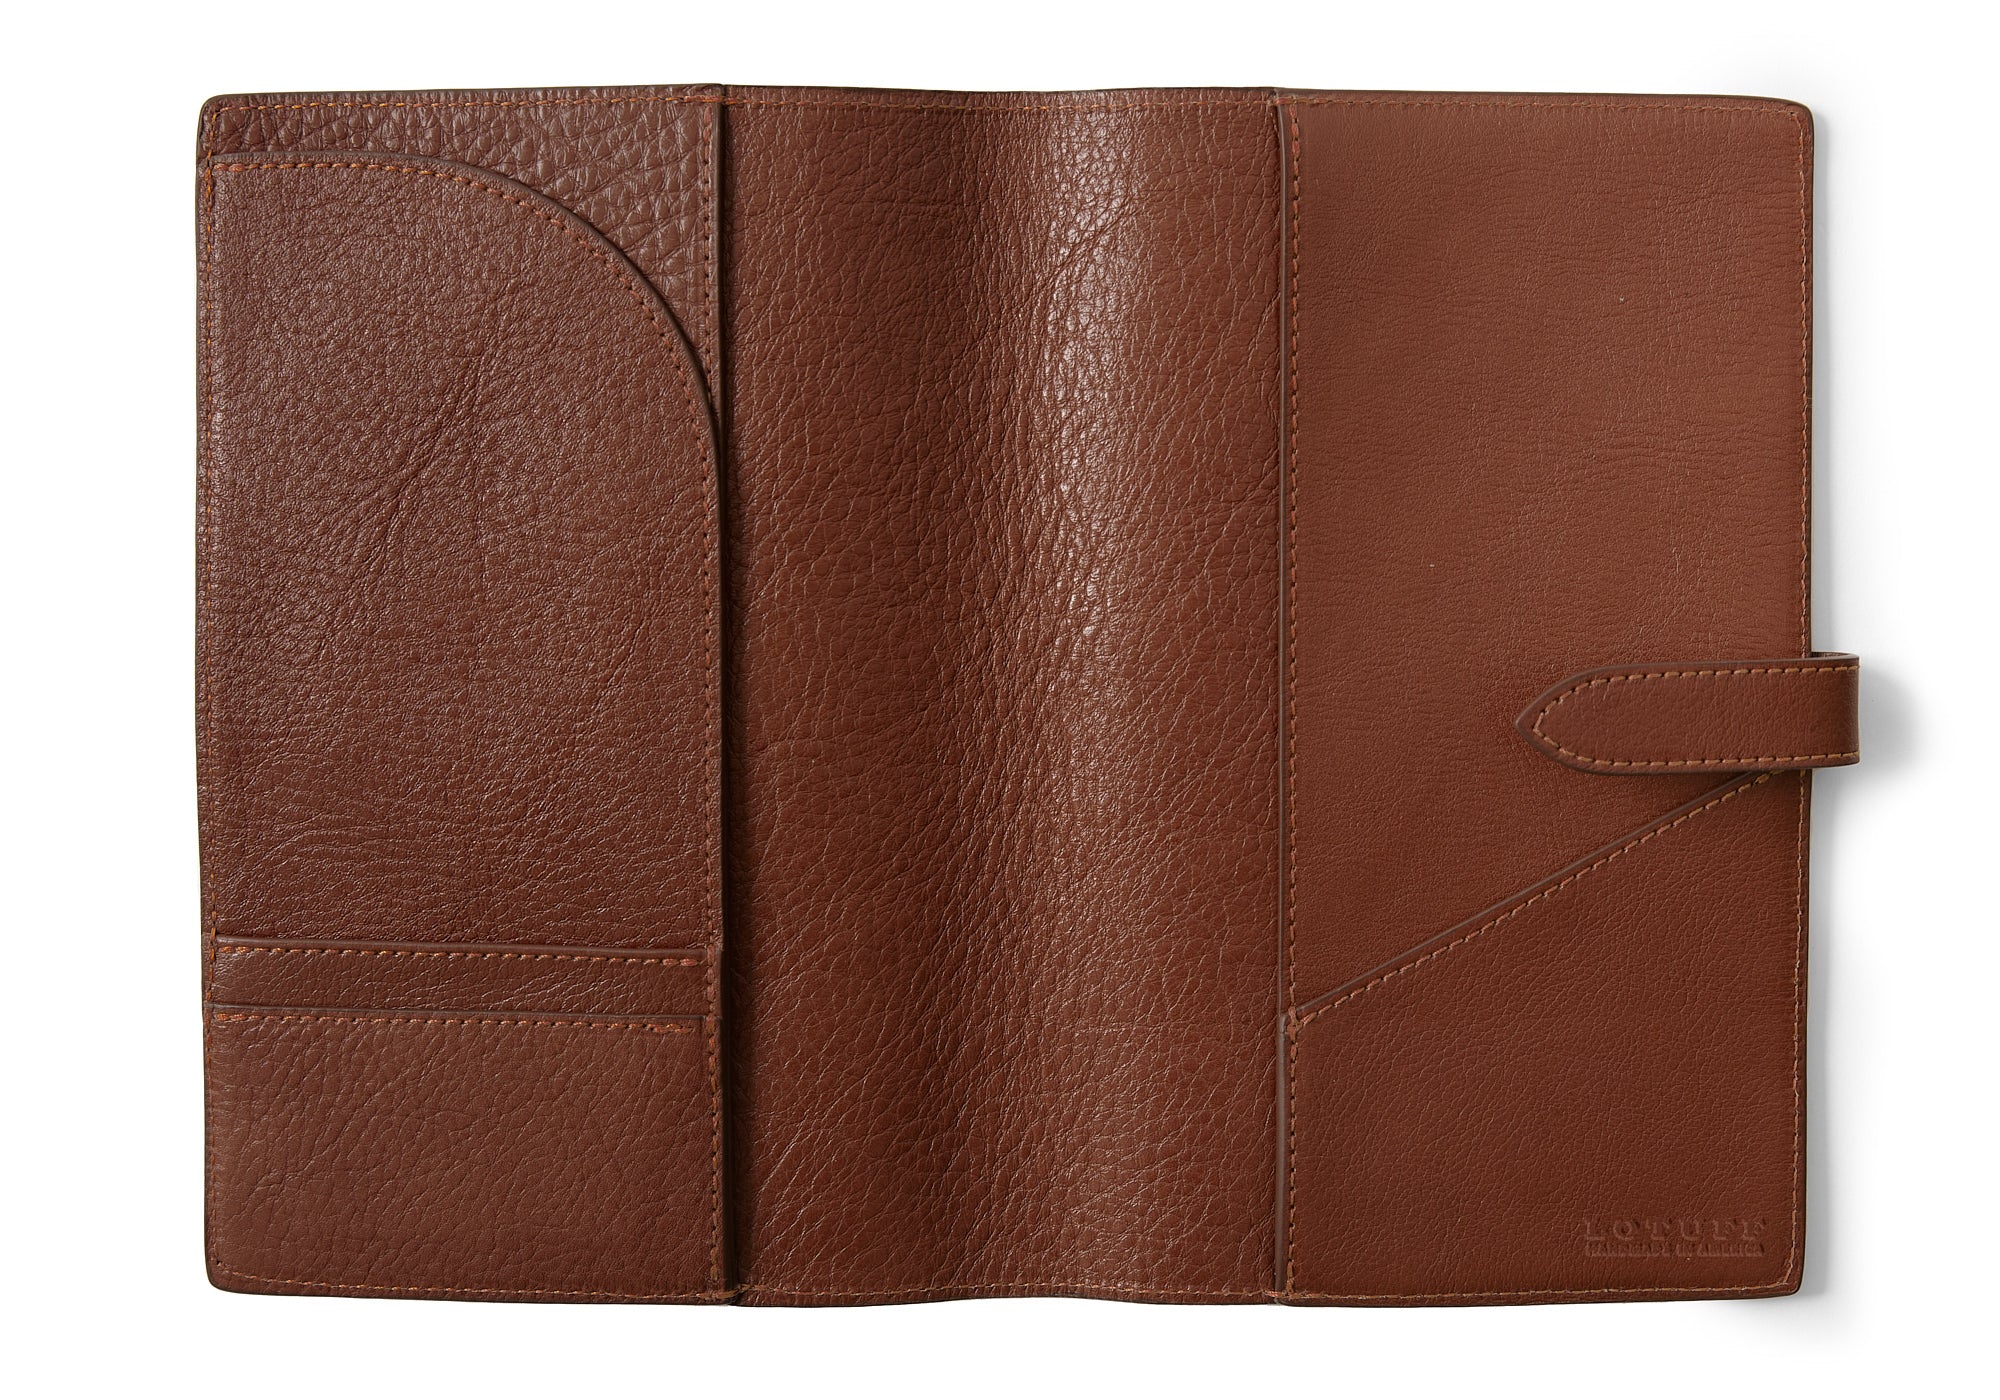 Top of Leather Travel Journal Chestnut